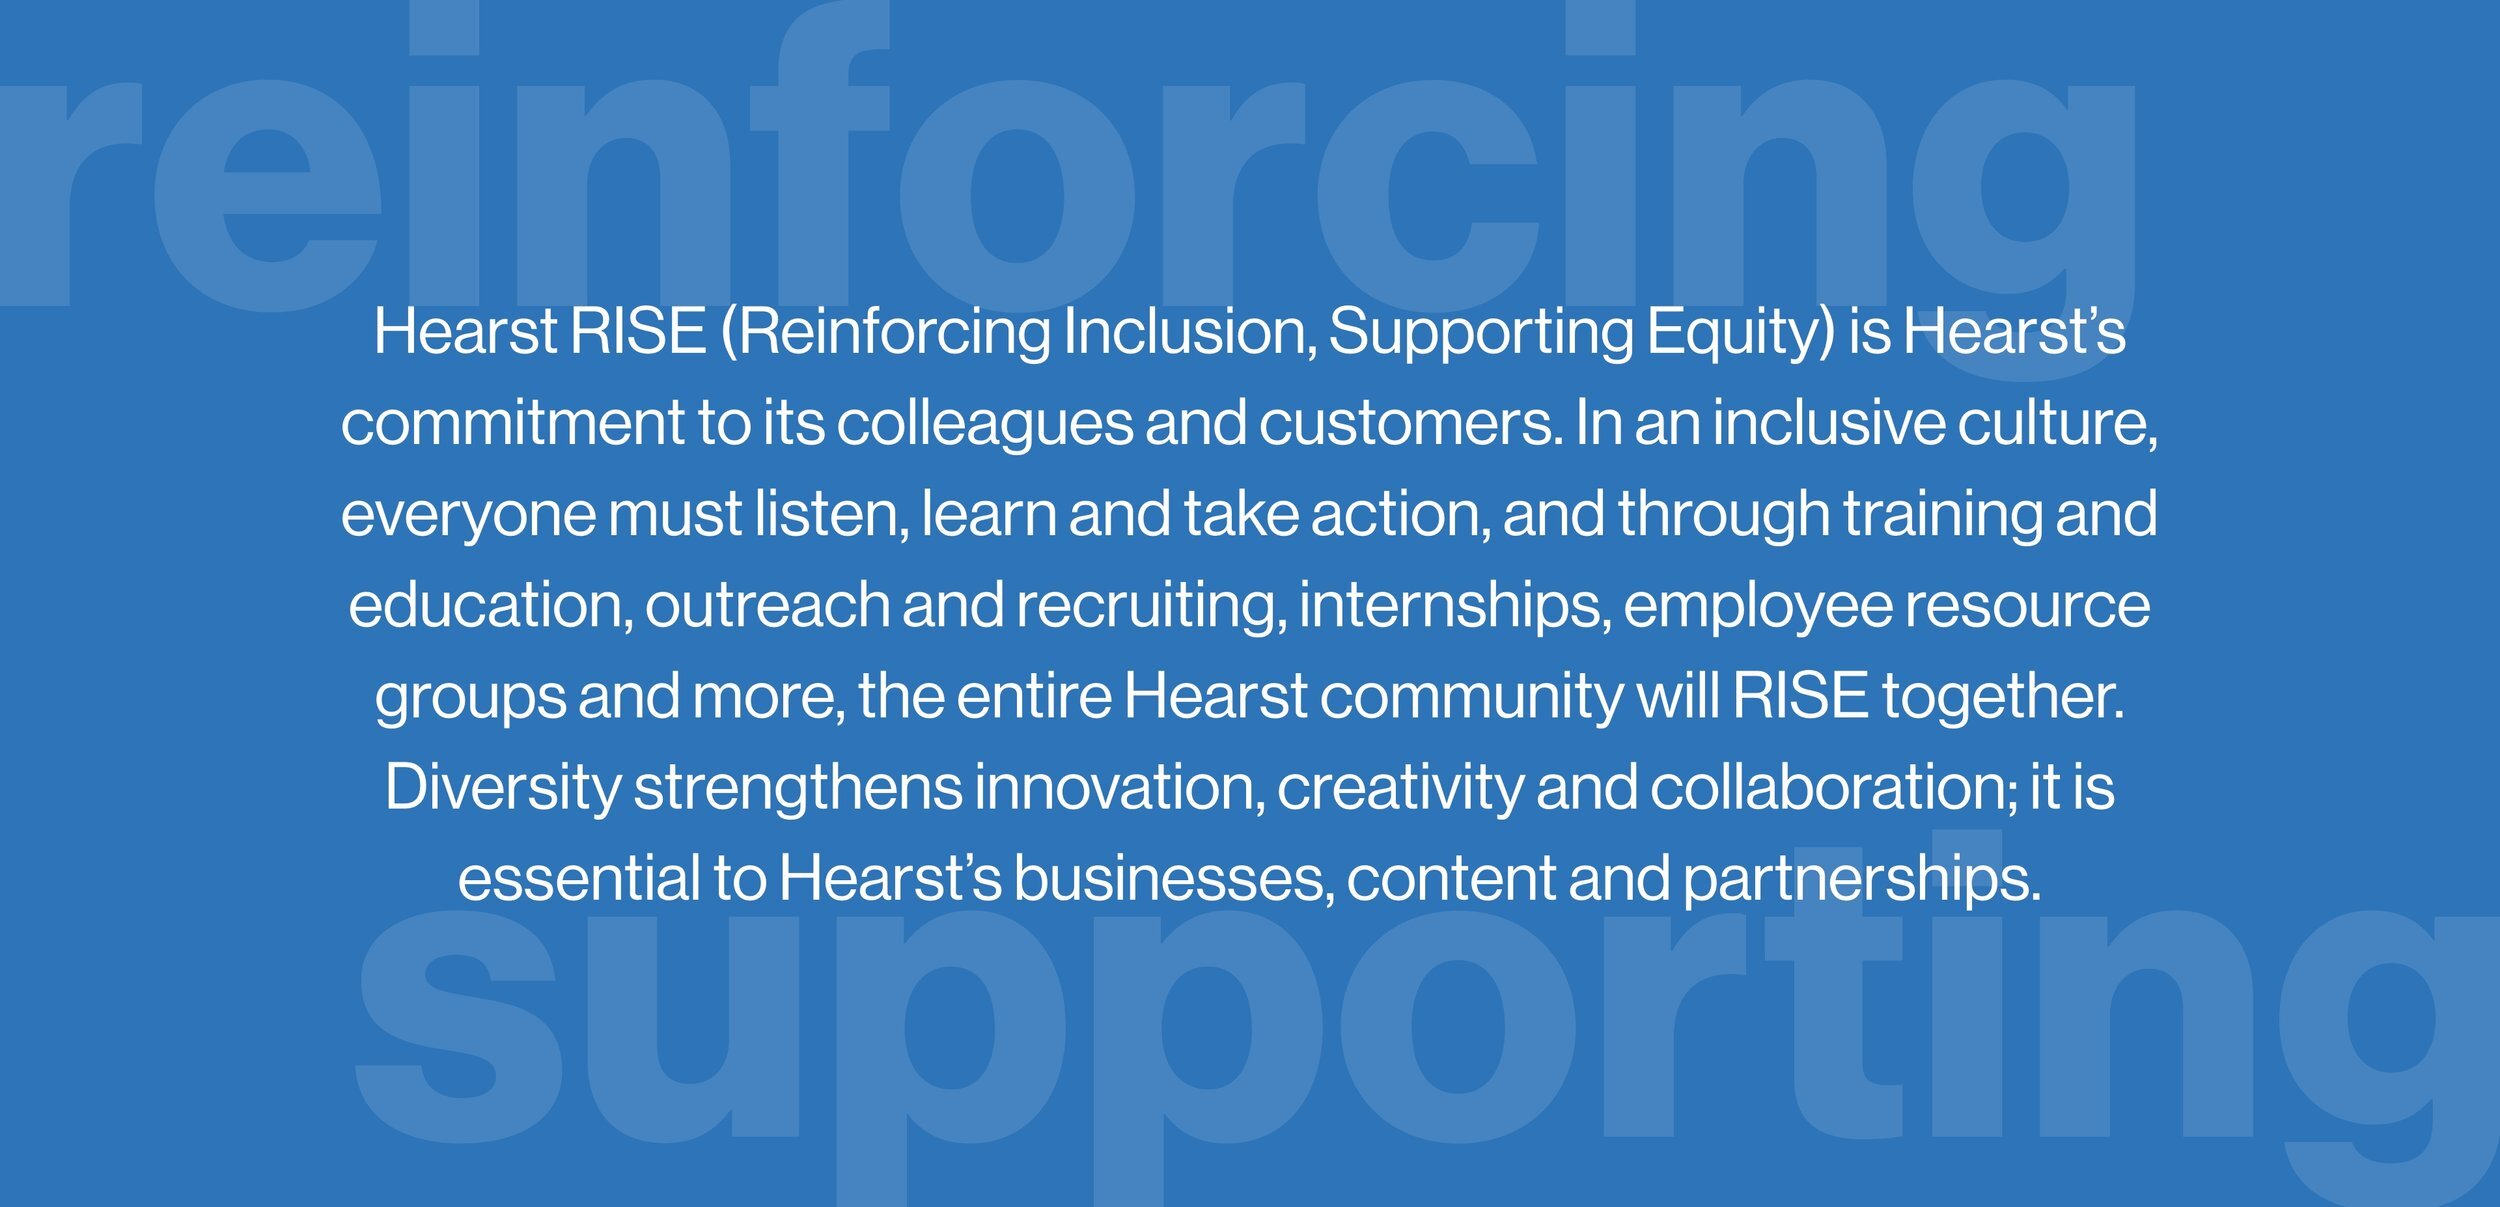 Hearst RISE (Reinforcing Inclusion, Supporting Equity) is Hearst’s commitment to its colleagues and customers. In an inclusive culture, everyone must listen, learn and take action, and through training and education, outreach and recruiting, internships, employee resource groups and more, the entire Hearst community will RISE together. Diversity strengthens innovation, creativity and collaboration; it is essential to Hearst’s businesses, content and partnerships.